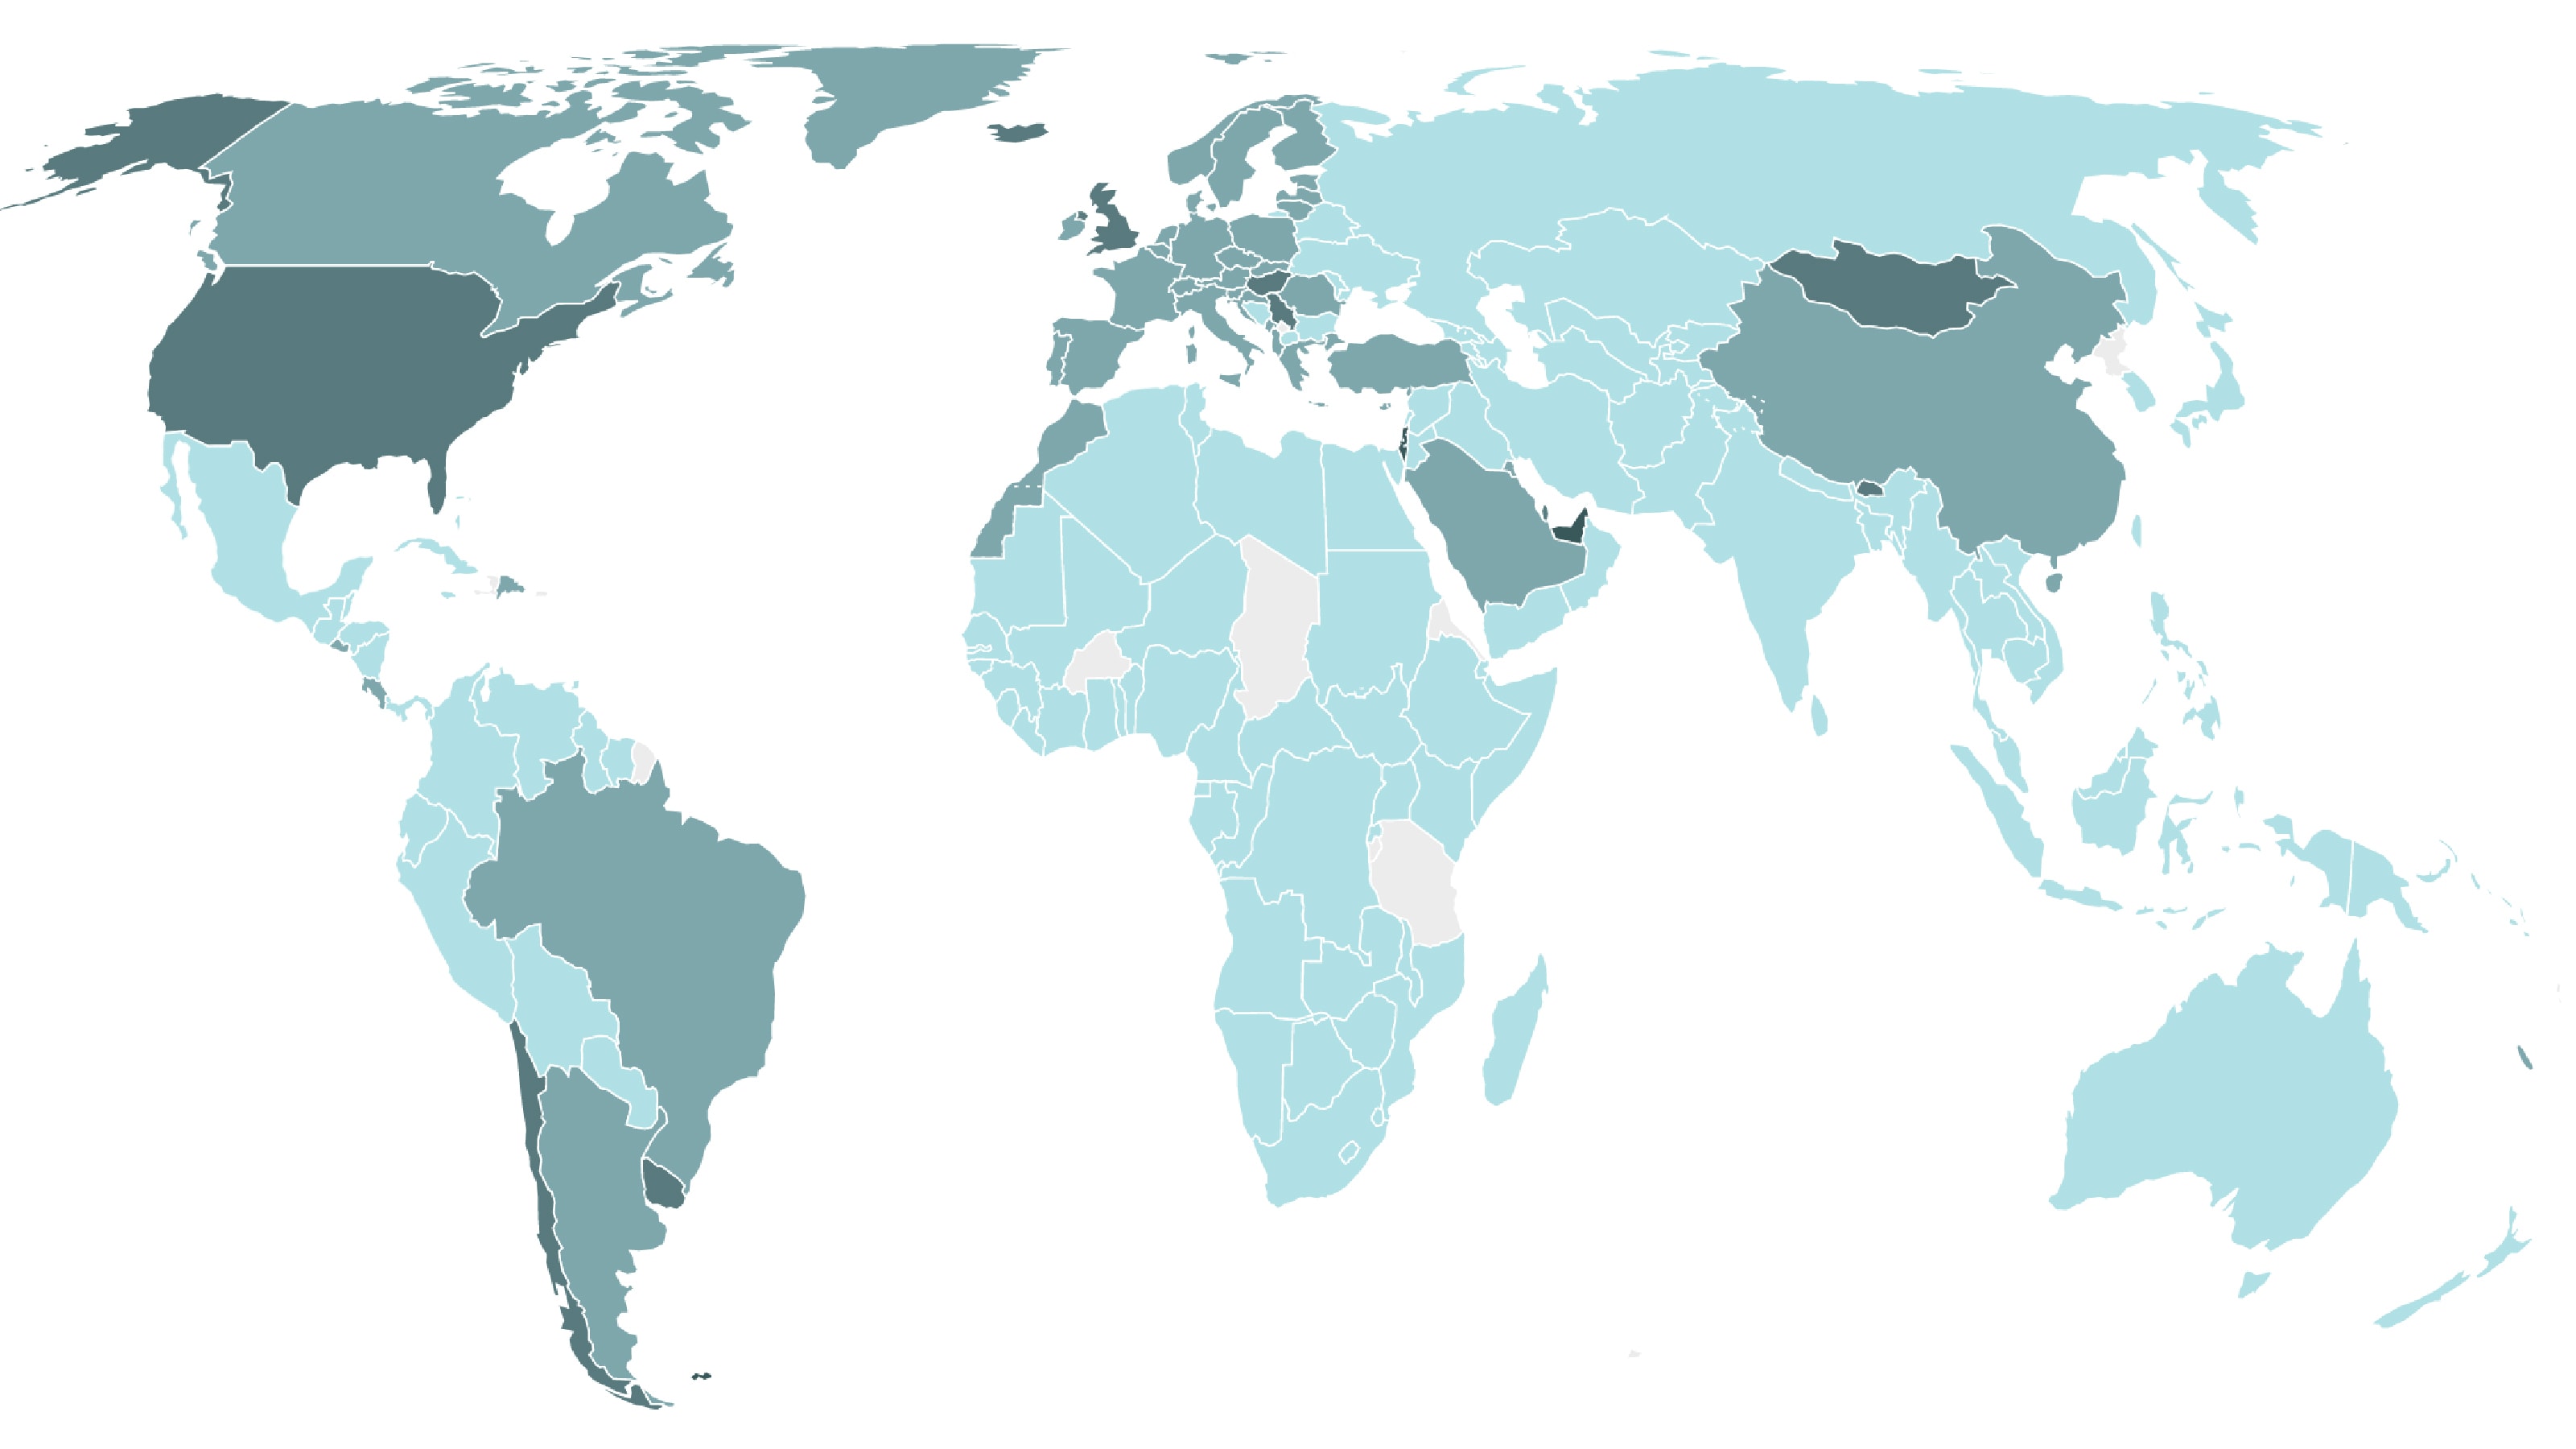 Tracking Covid-19 vaccinations worldwide